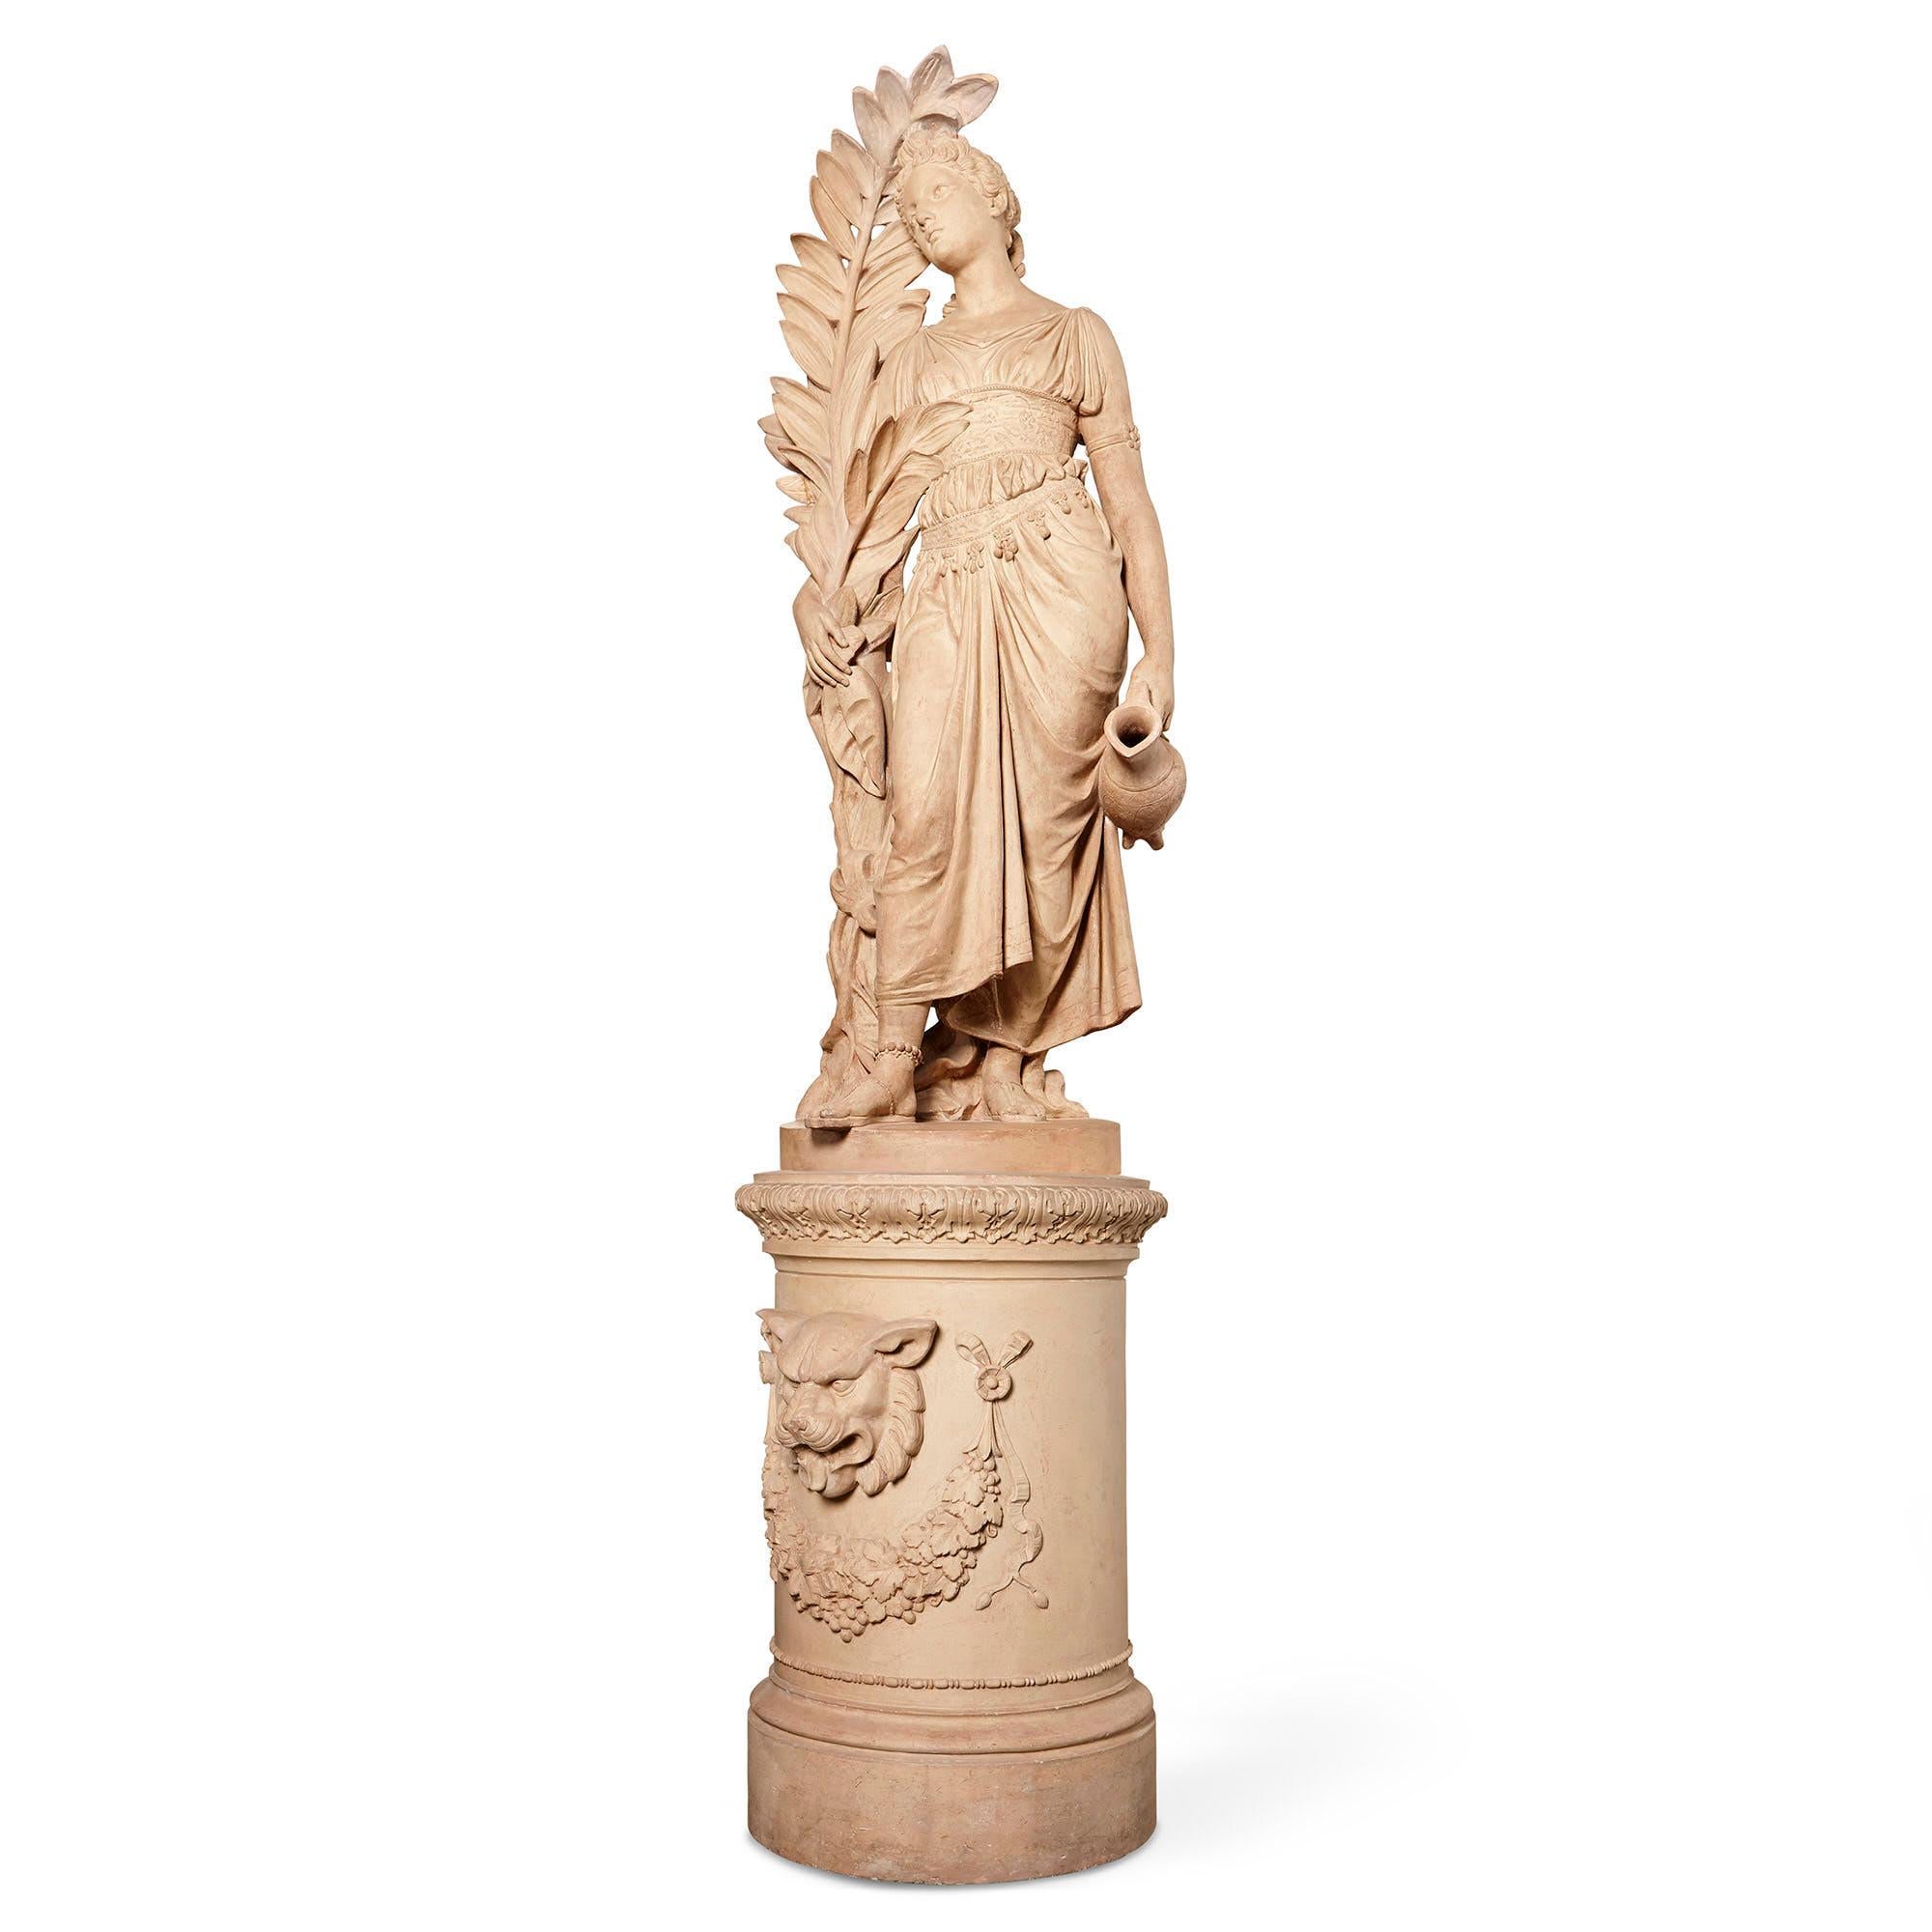 This life-sized terracotta sculpture of the classical Greek figure, Hebe, is a truly beautiful piece. Daughter of Zeus and Hera, Hebe was the goddess of youth, and cupbearer to the Olympian gods. Hebe is represented as a beautiful young woman in a